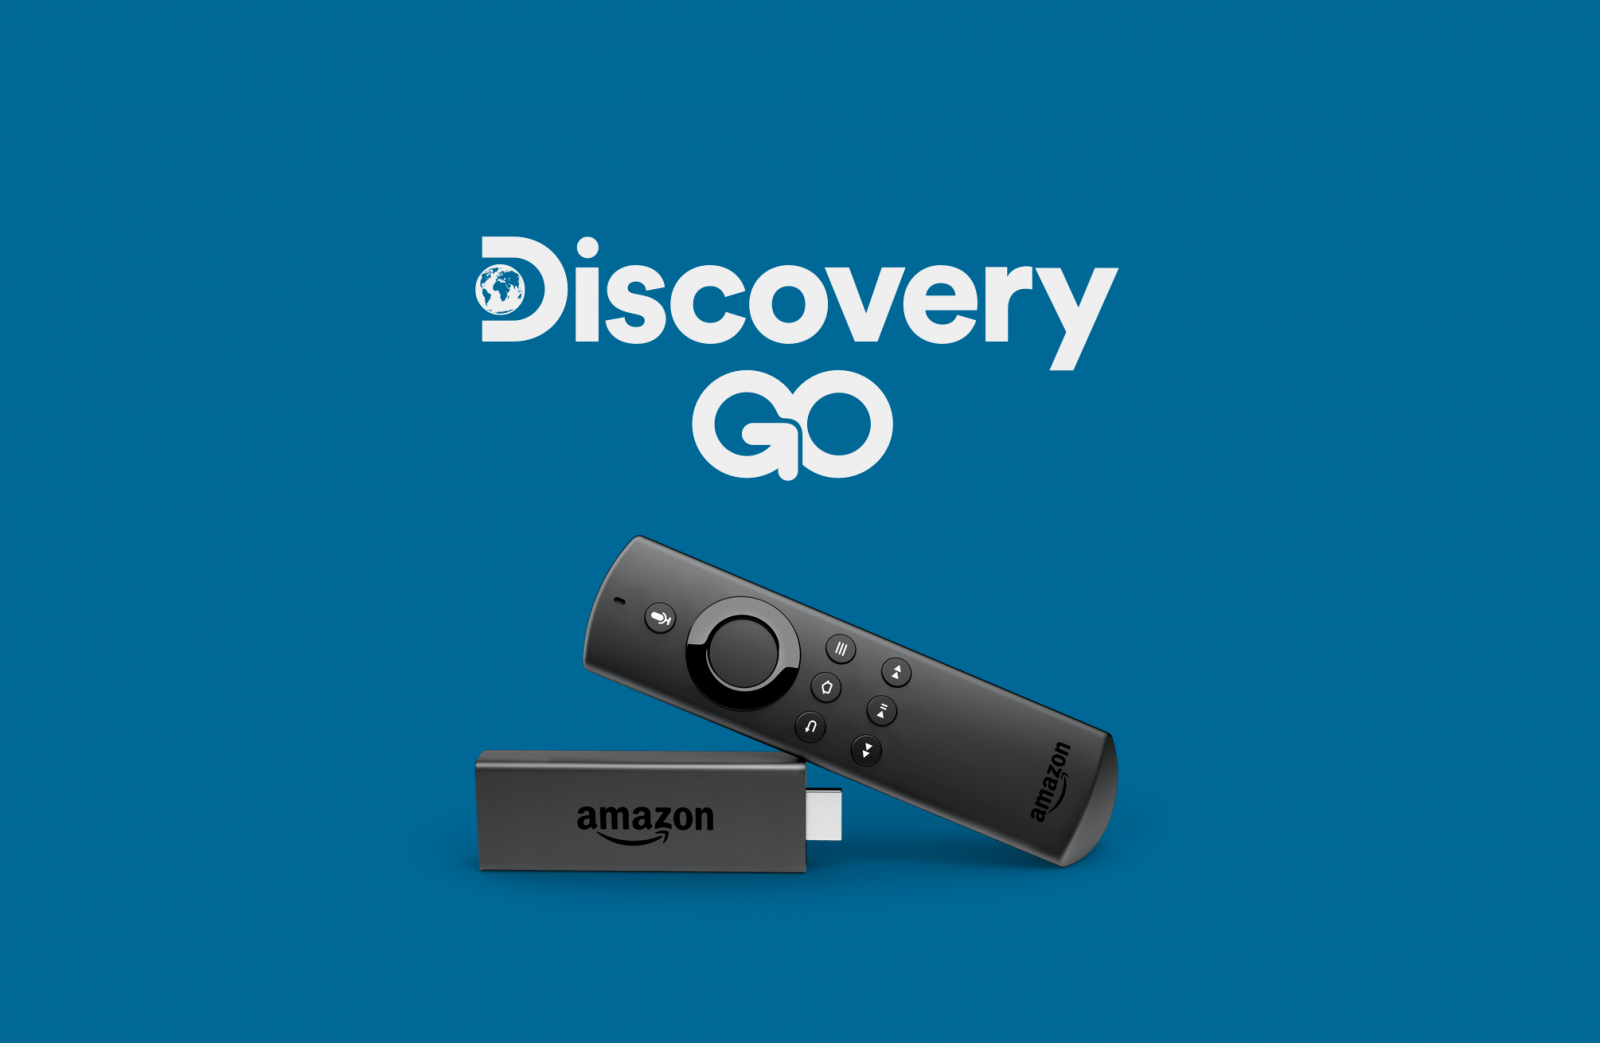 Discovery Channel on Firestick (1)